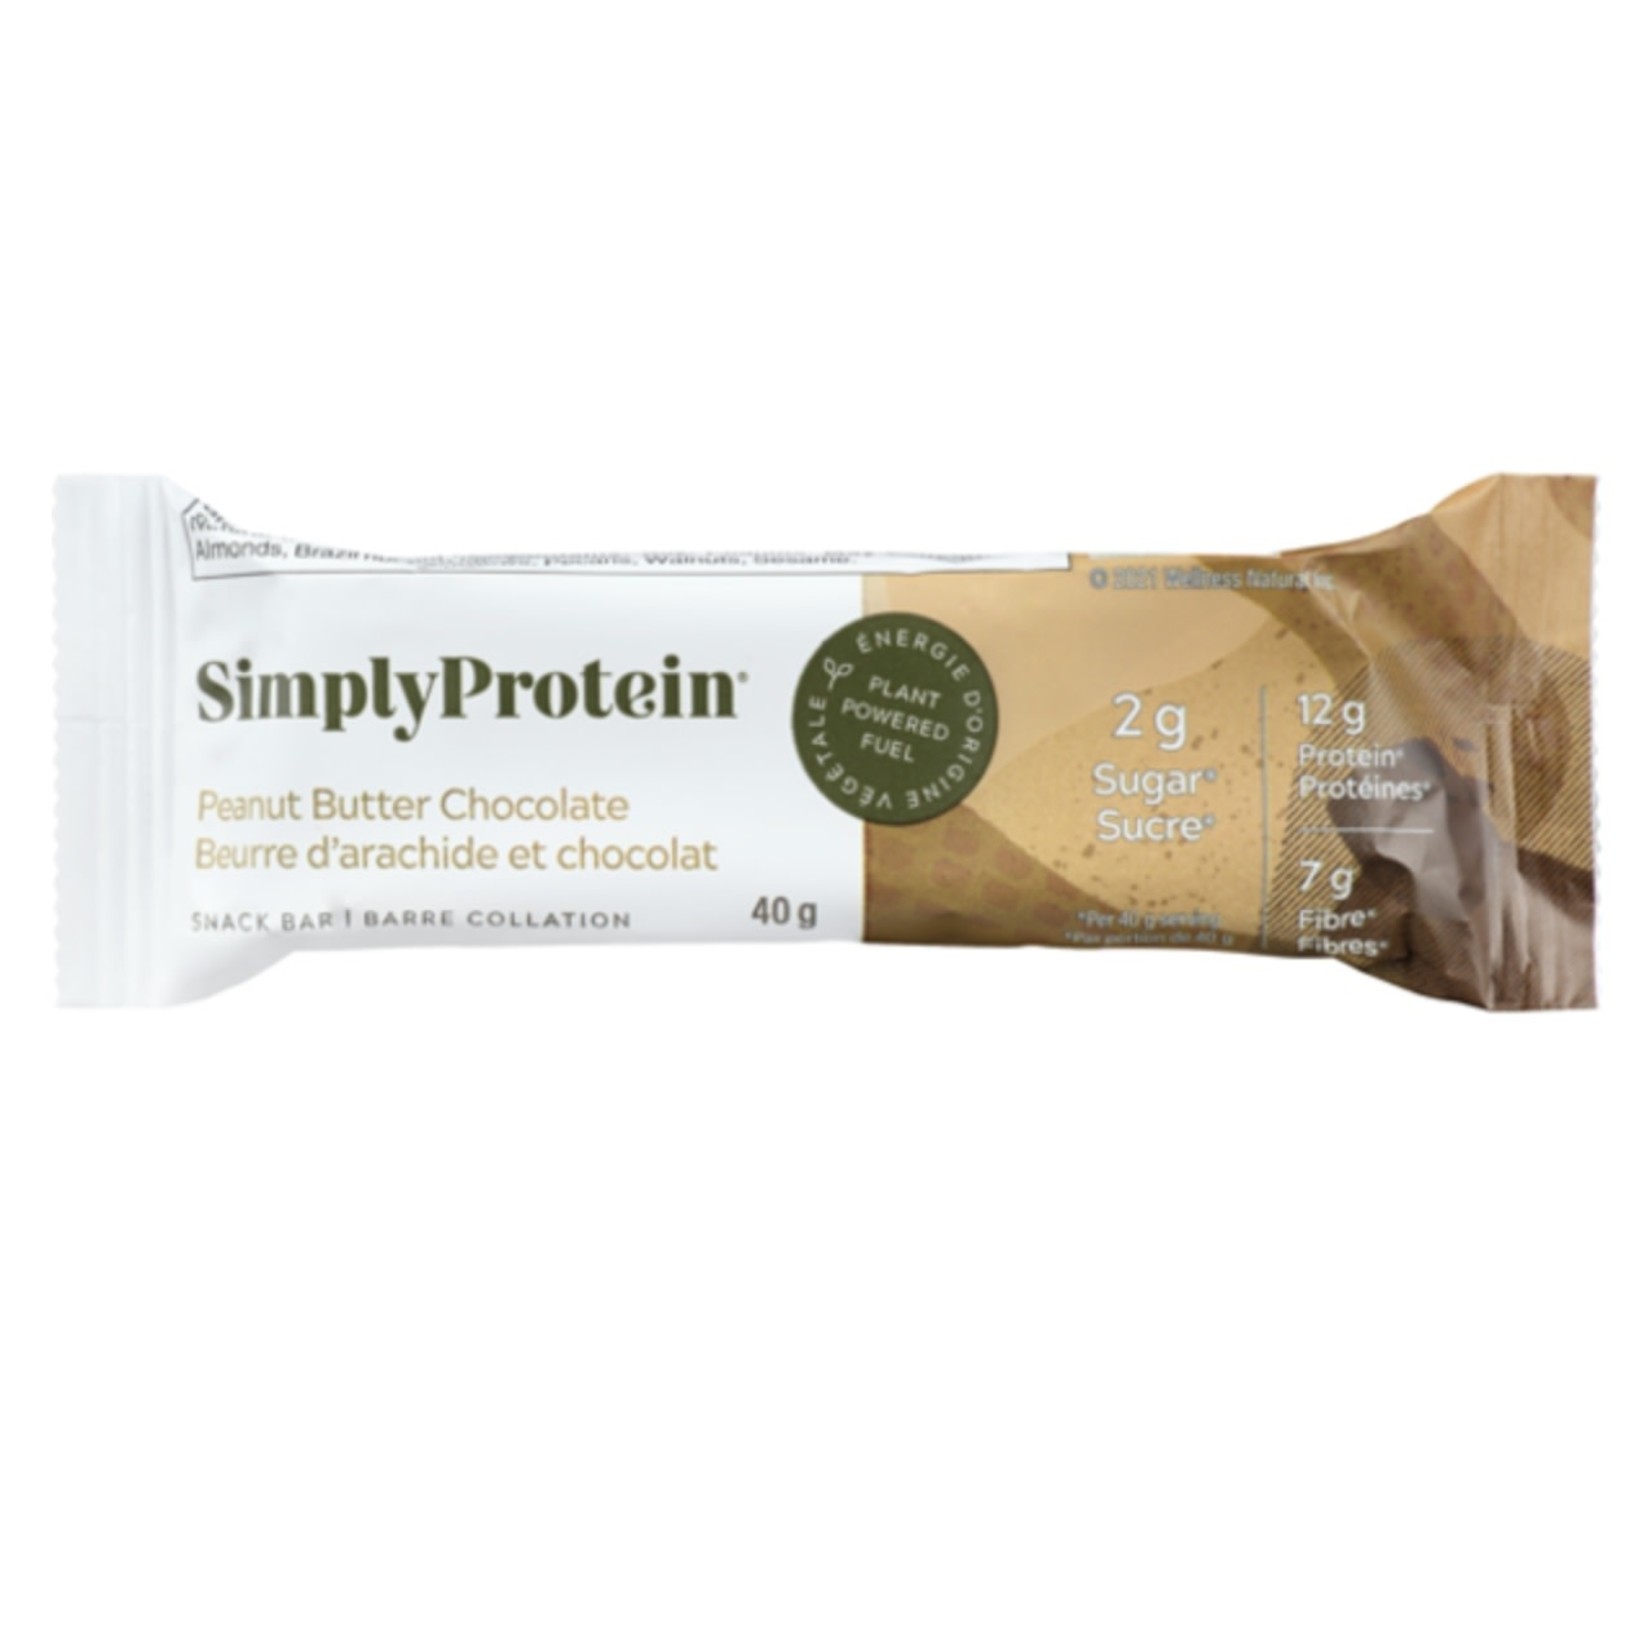 Simply Protein Simply Protein Peanut Butter Chocolate Bar 40g